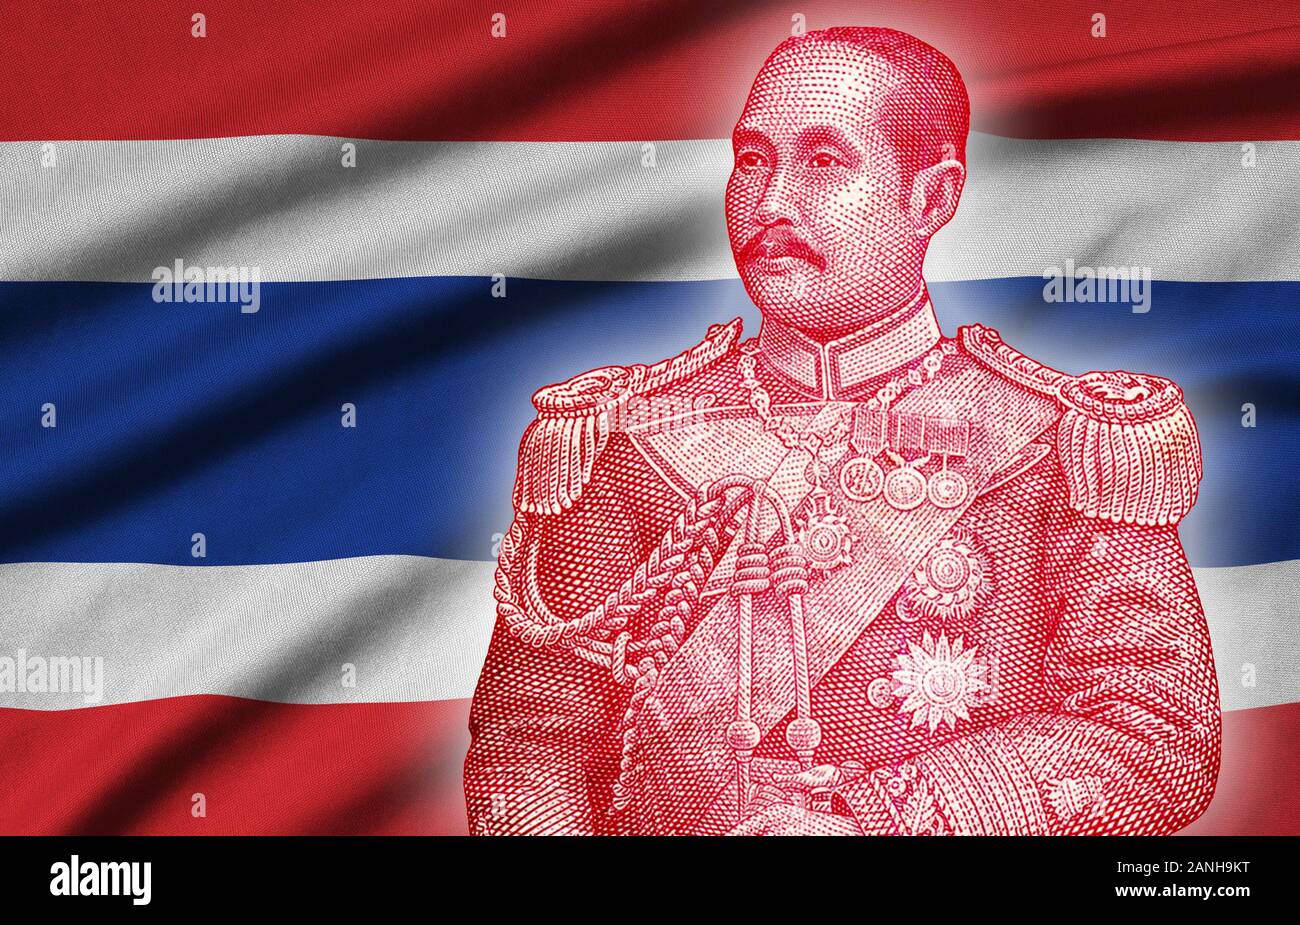 Portrait of Chulalongkorn also known as King Rama V was the fifth monarch of Siam under the House of Chakri. Figure on Thailand flag background Stock Photo